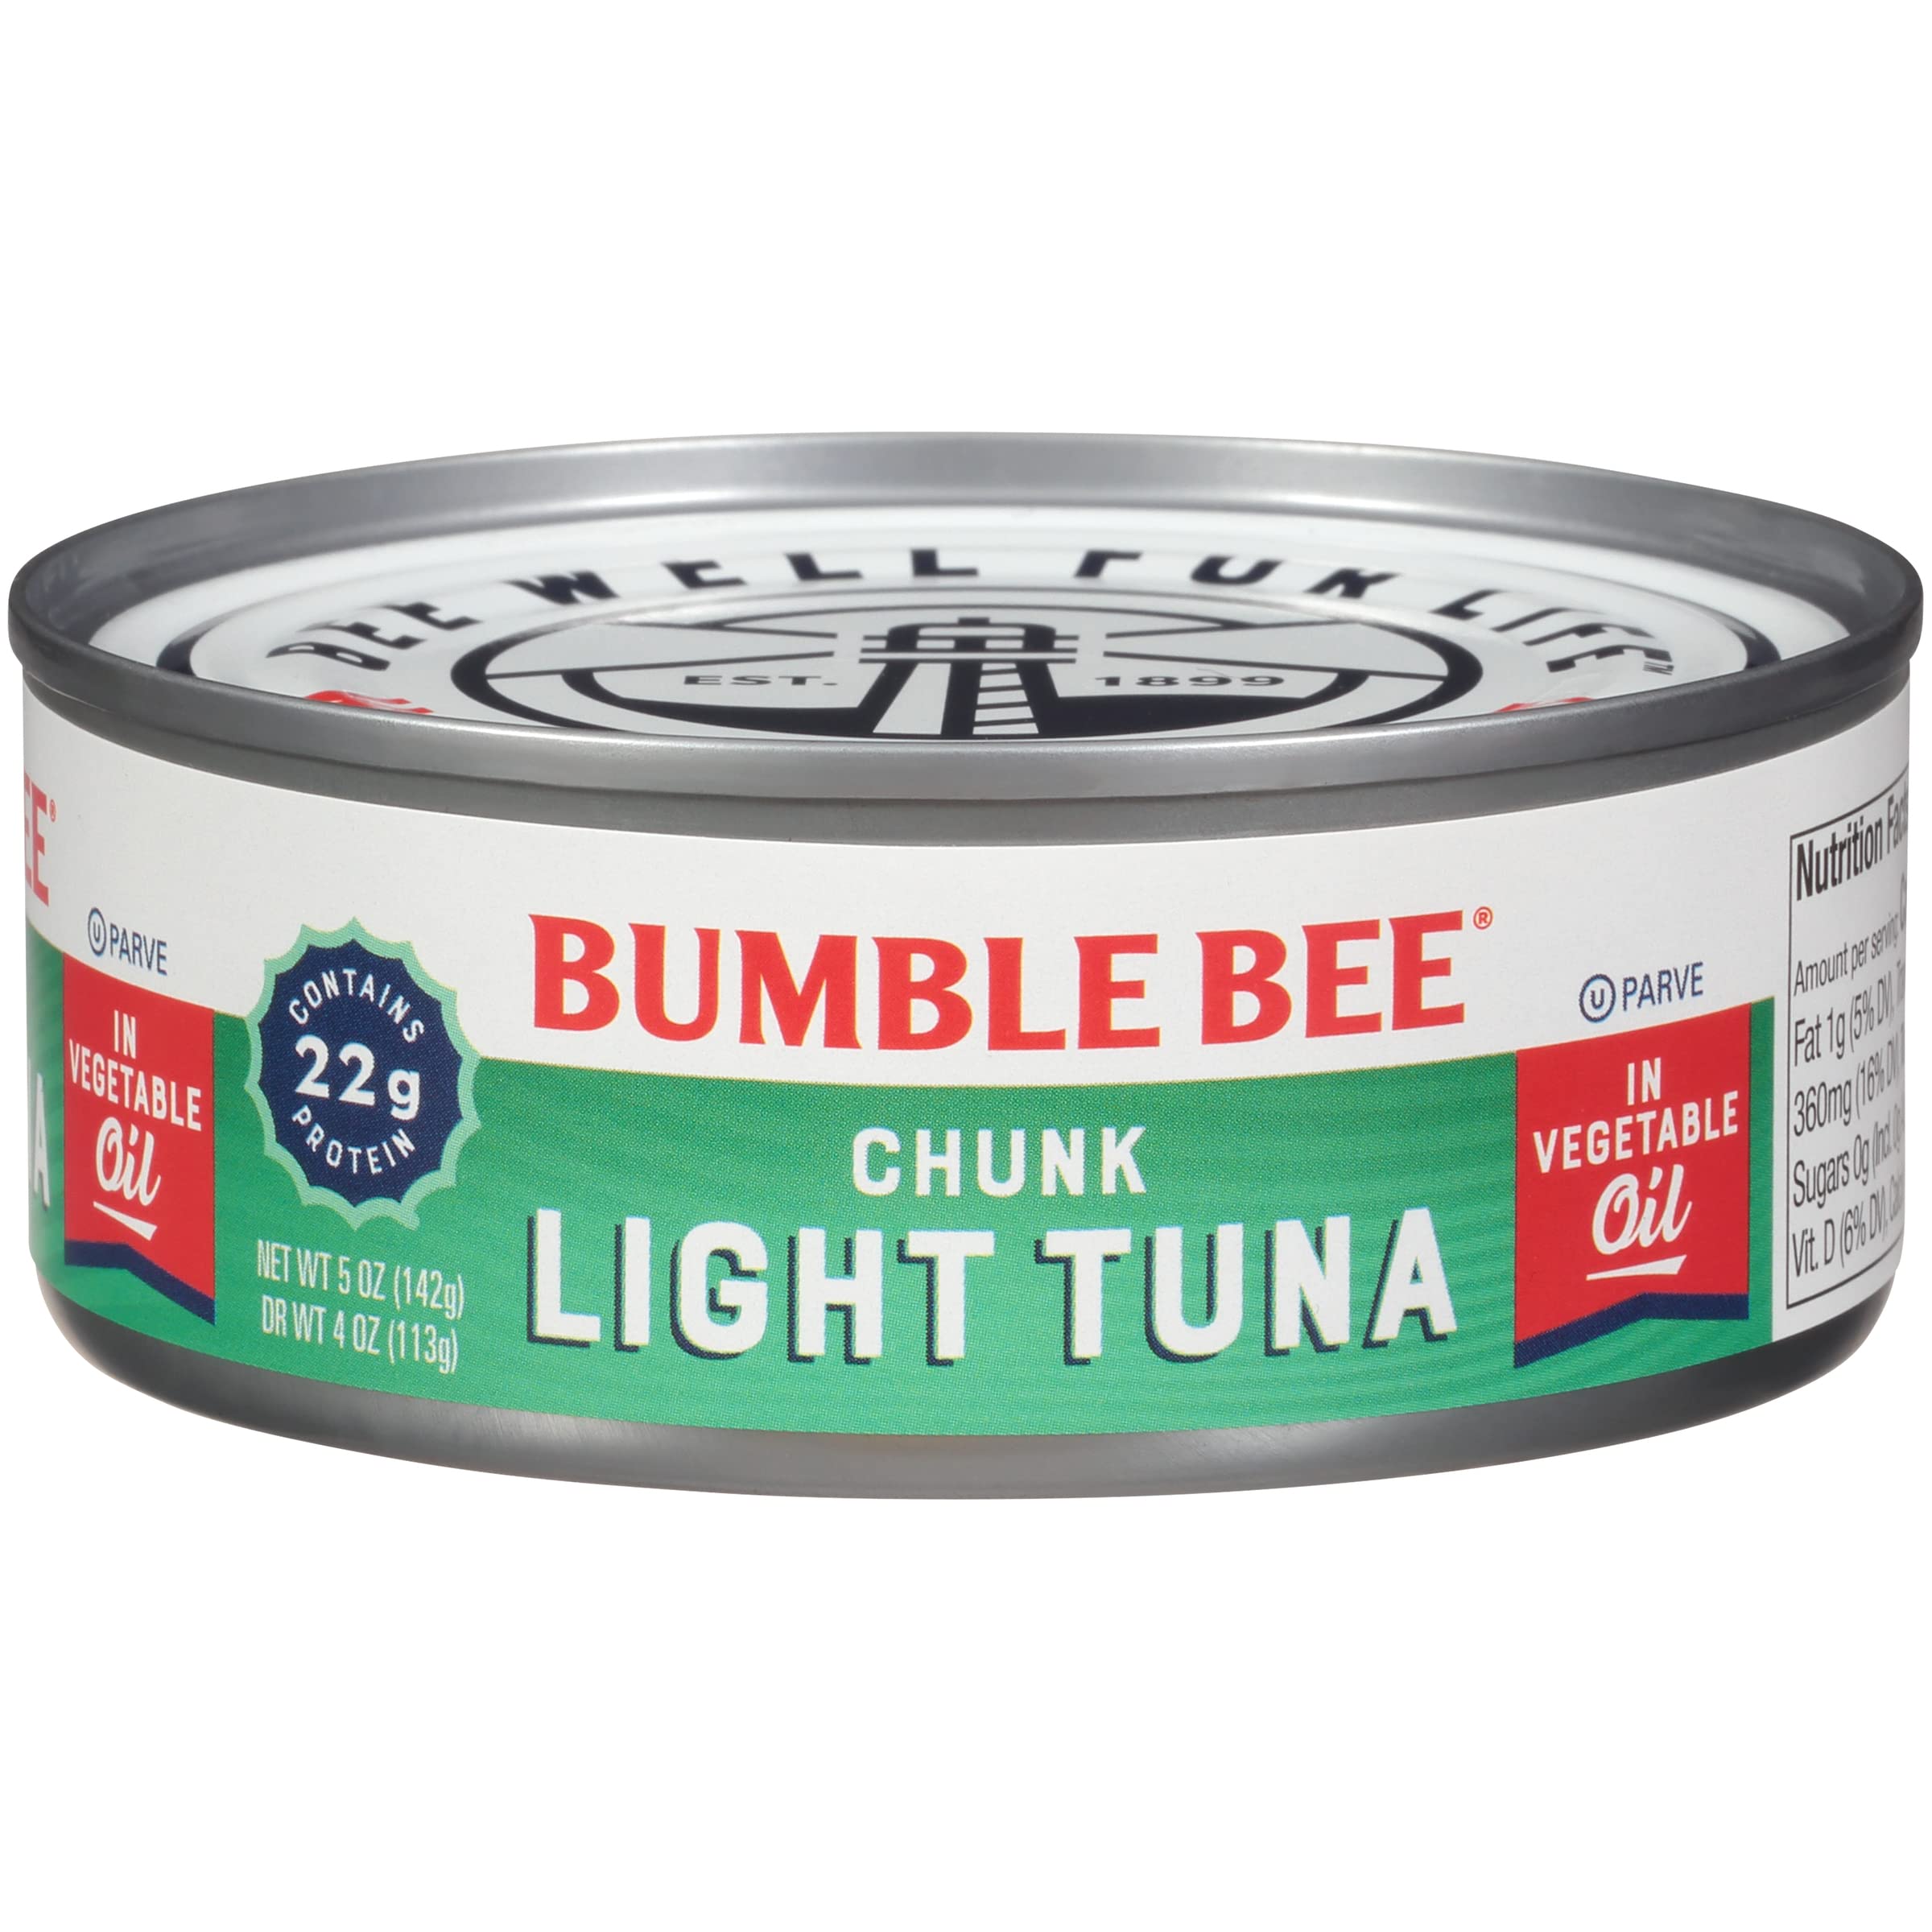 Bumble Bee Chunk Light Tuna in Oil, 5 oz Cans (Pack of 24) - $19.86